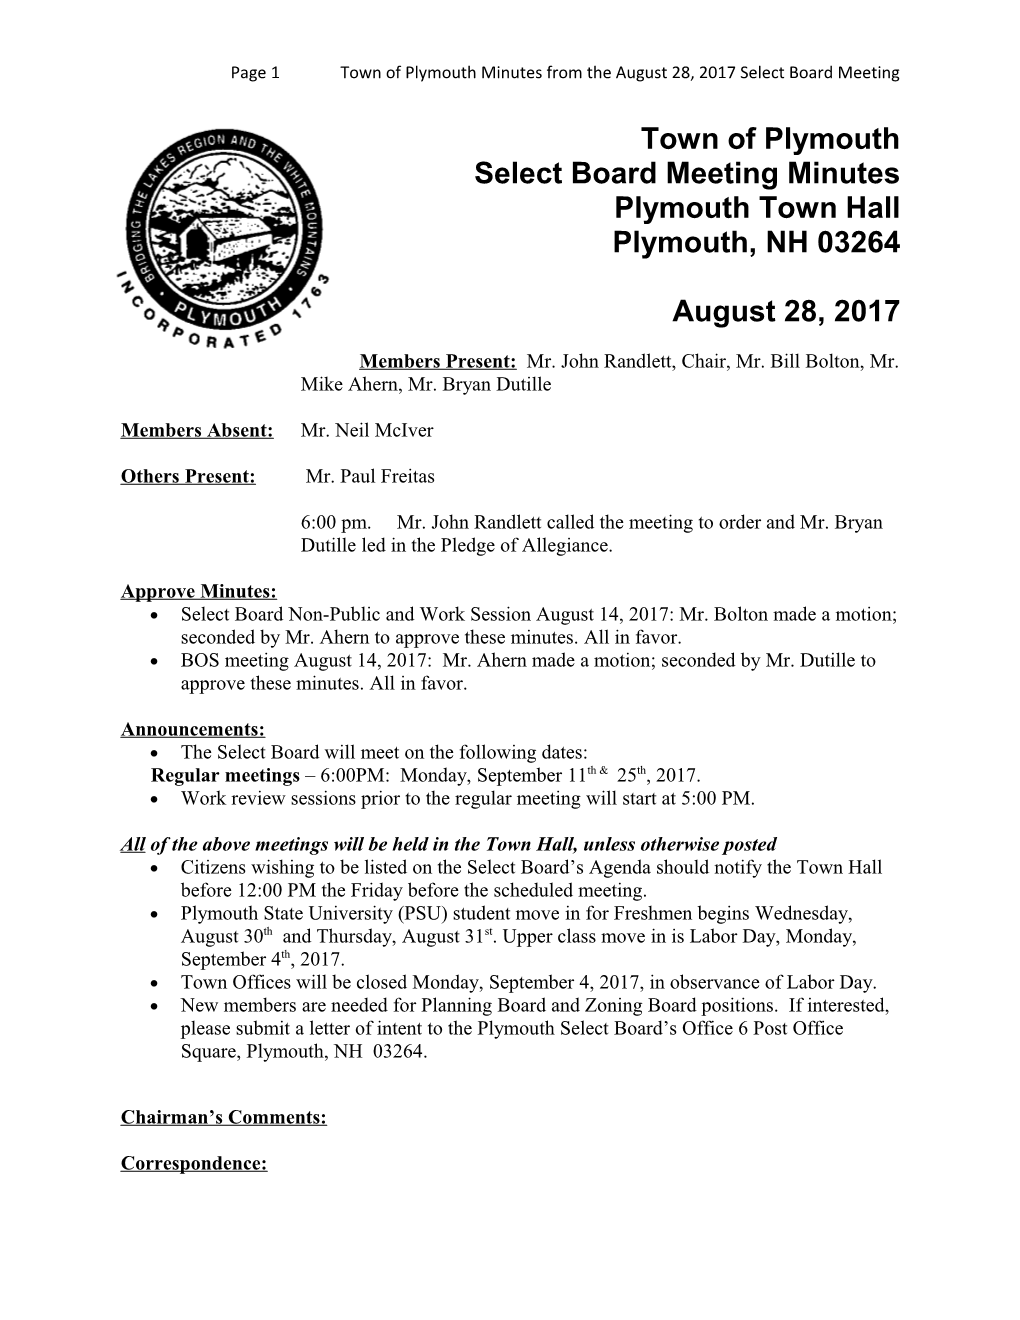 Page 1Town of Plymouth Minutes from Theaugust28, 2017 Select Board Meeting